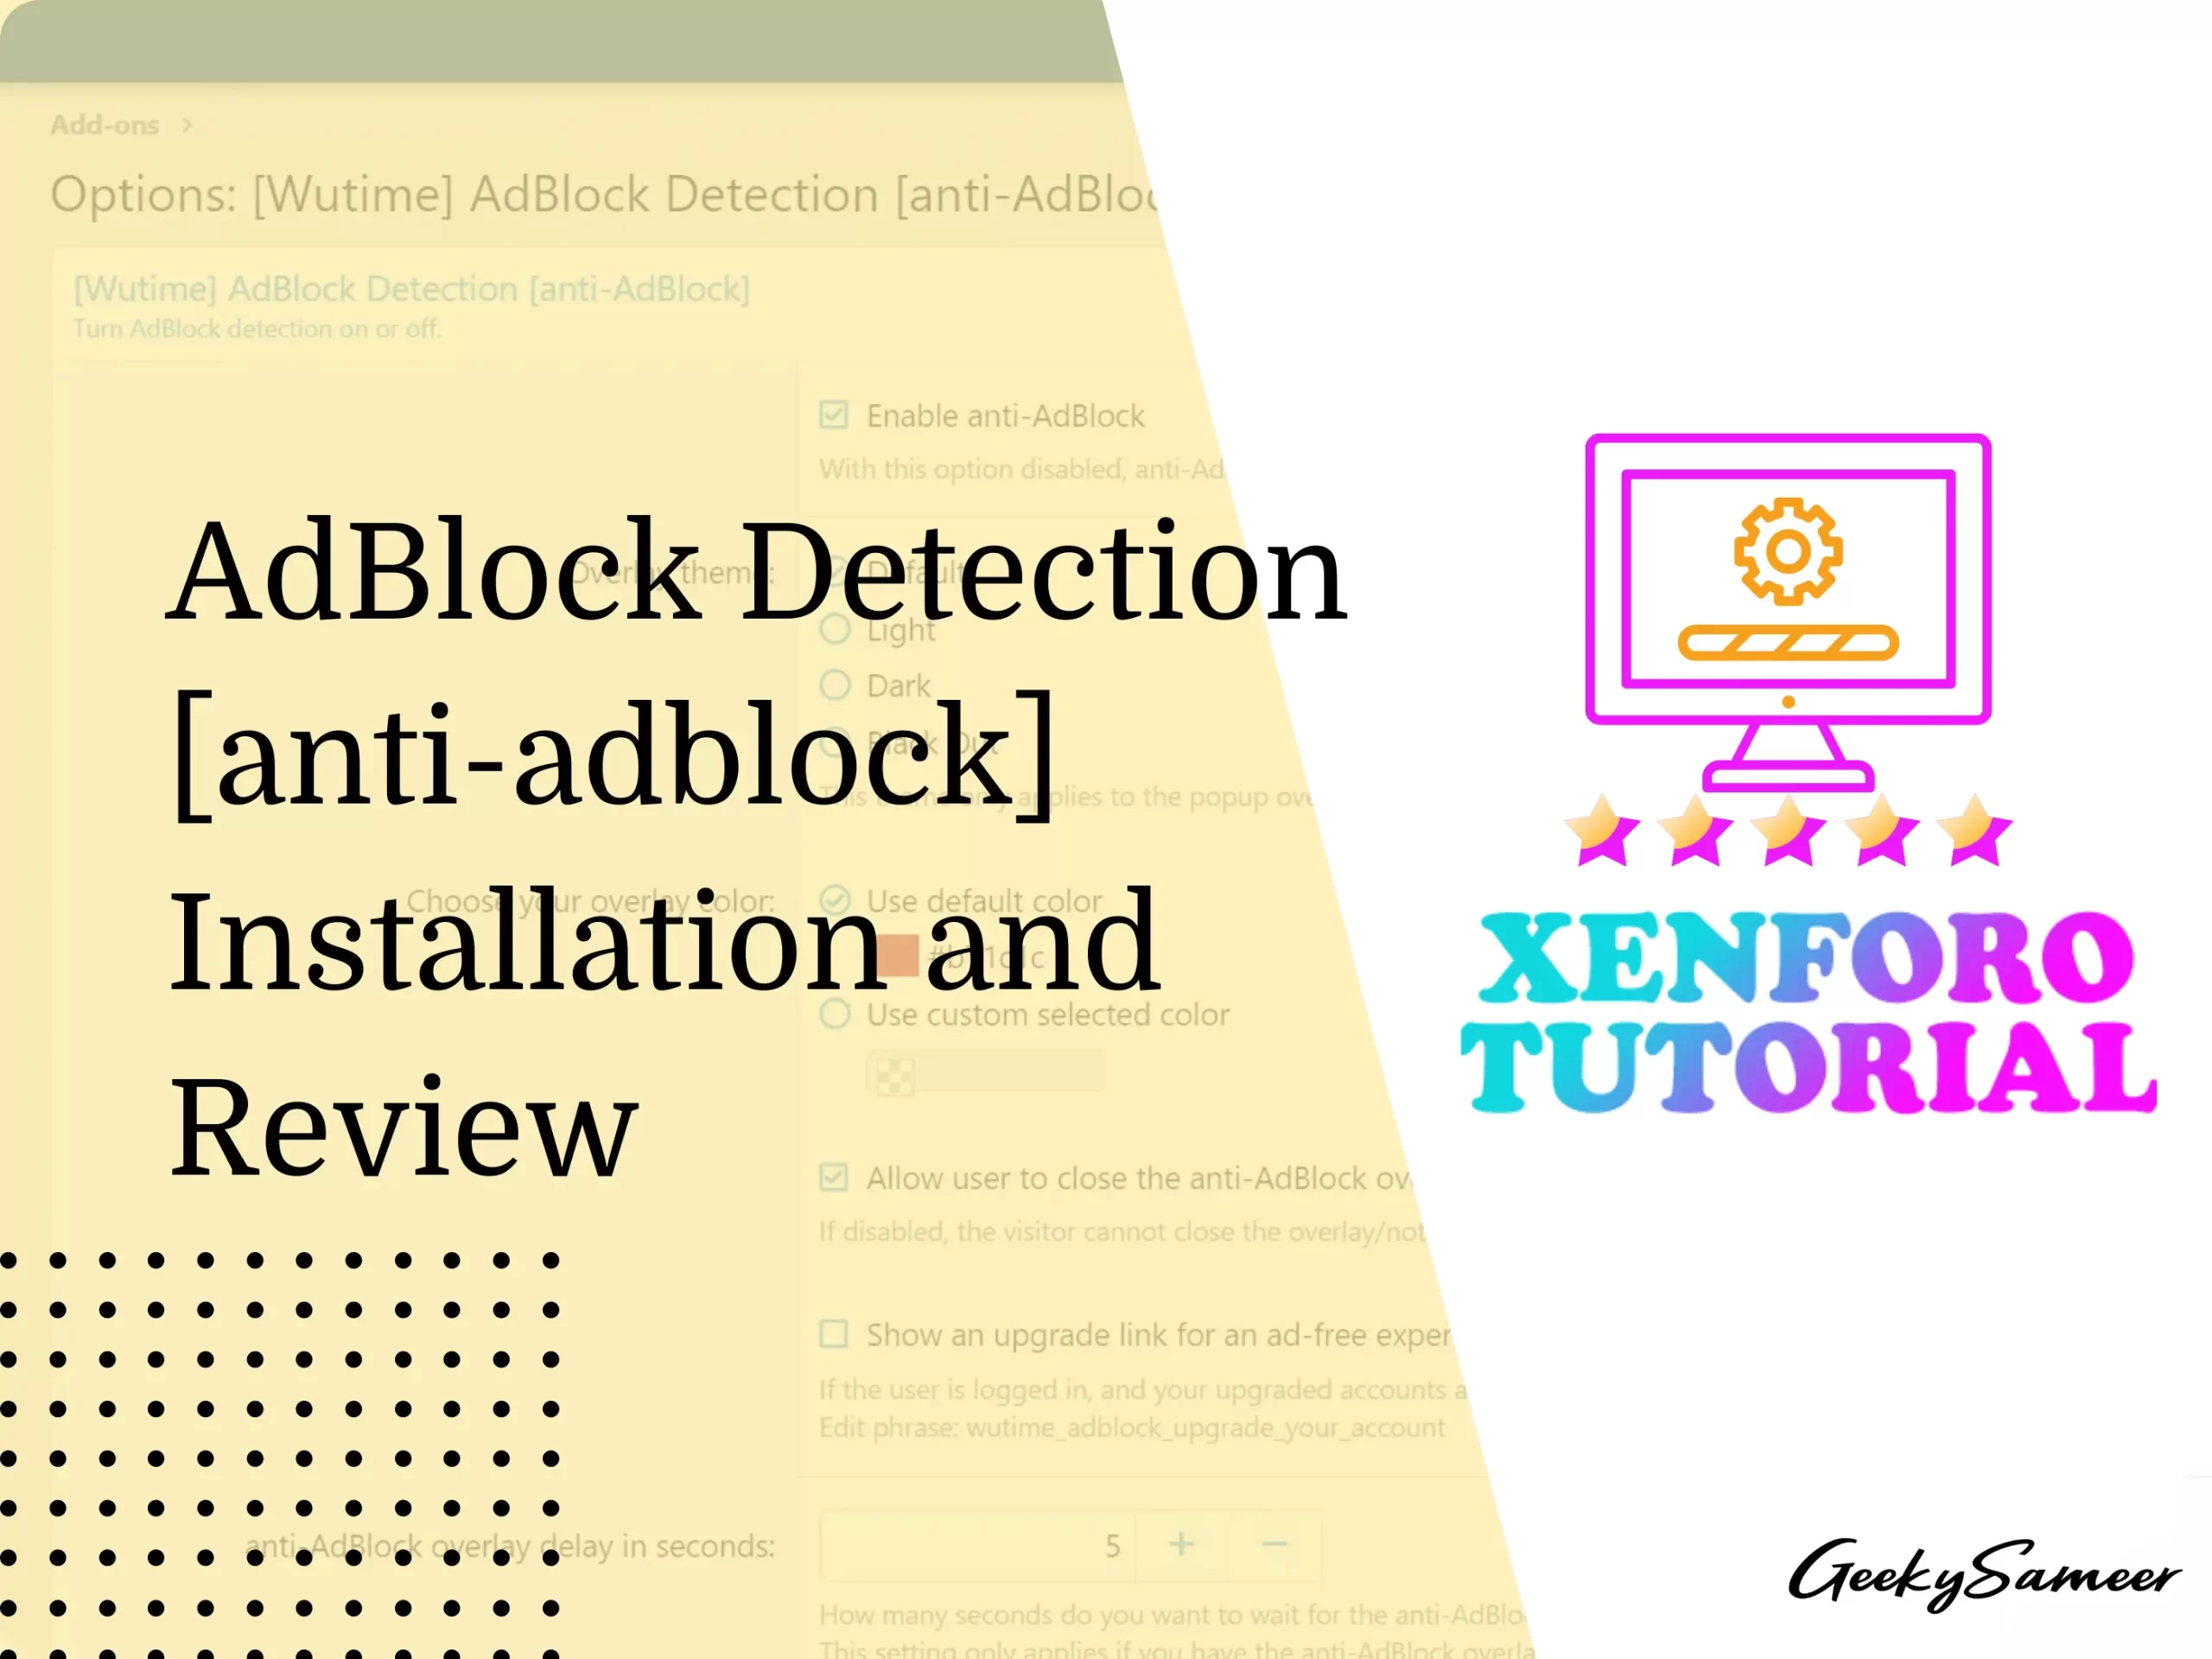 adblock detection installation and review